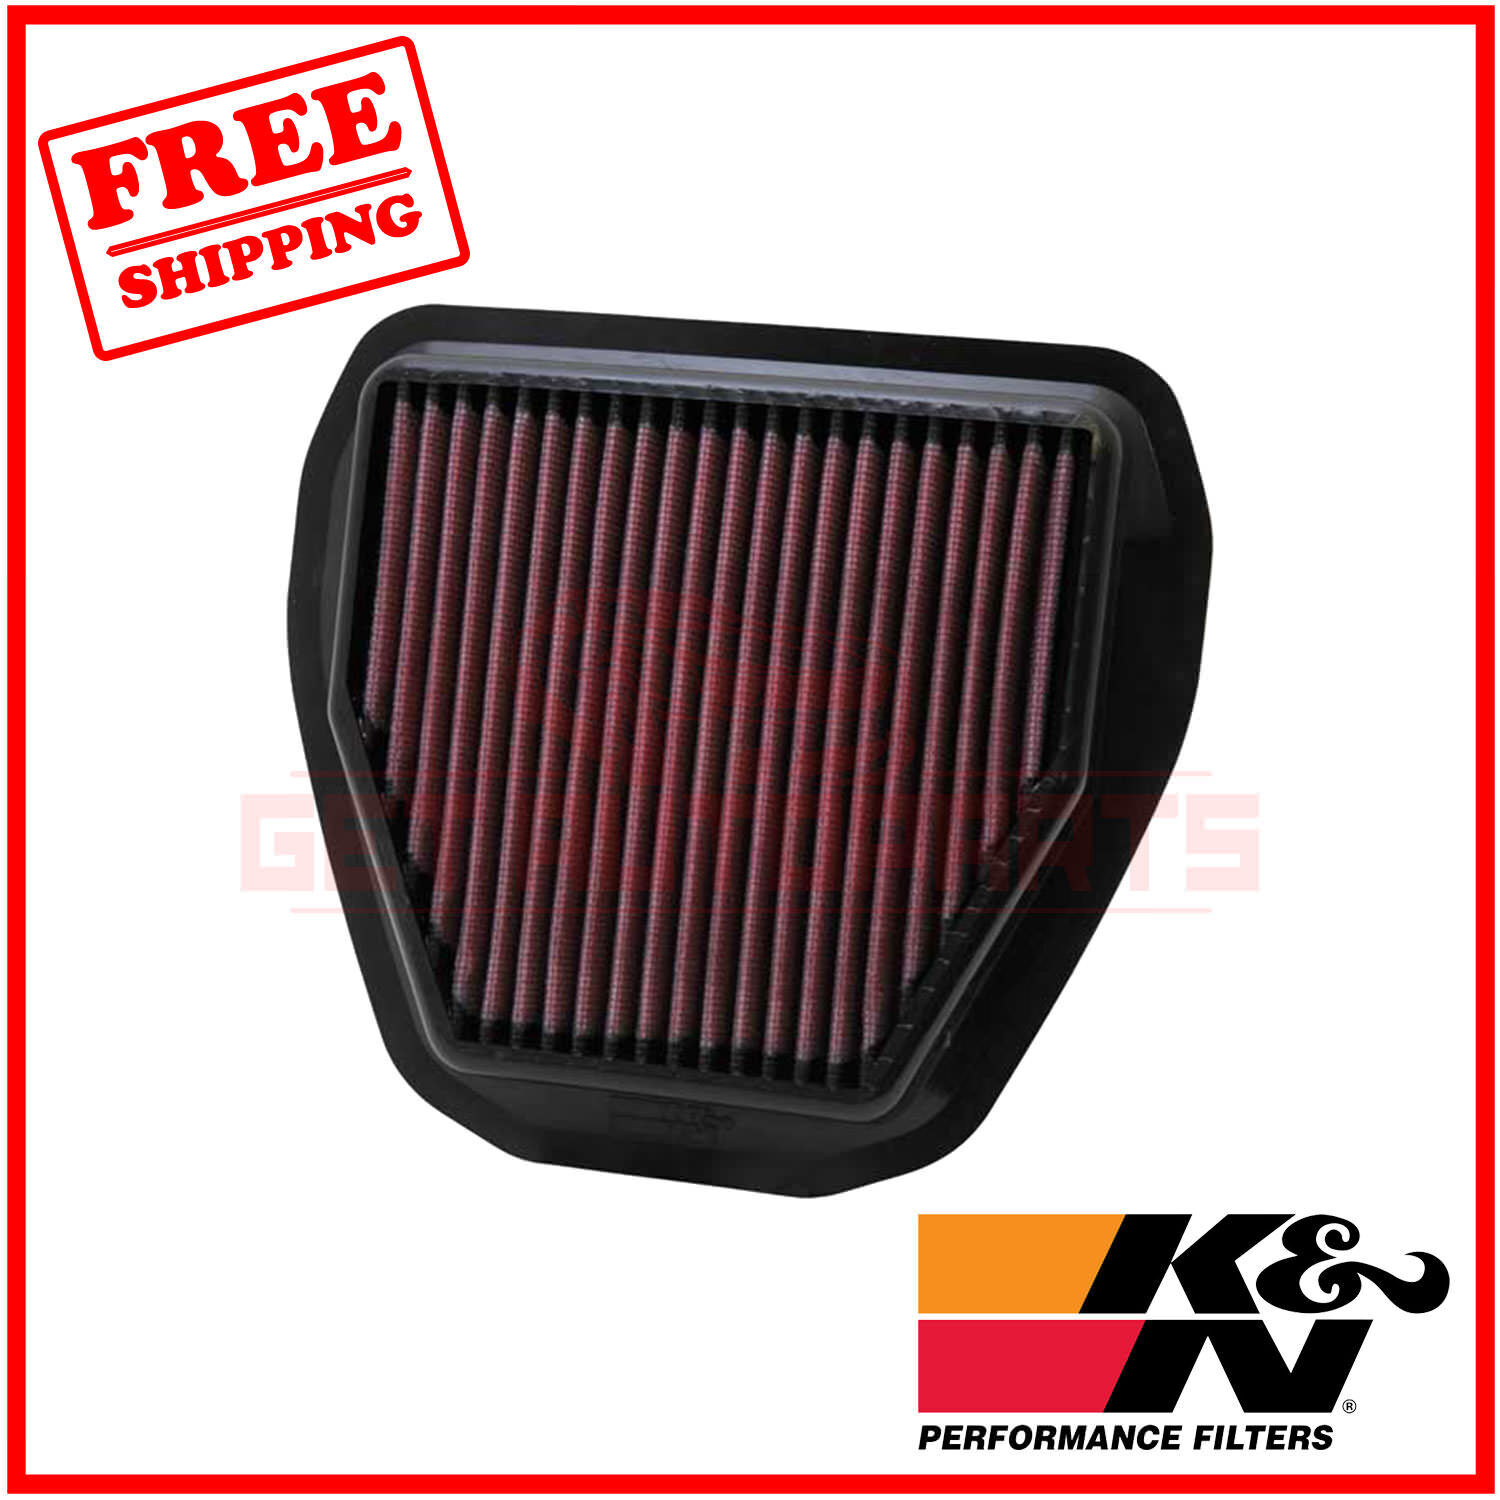 K&N Replacement Air Filter fits Yamaha YZ450F 2010-2013